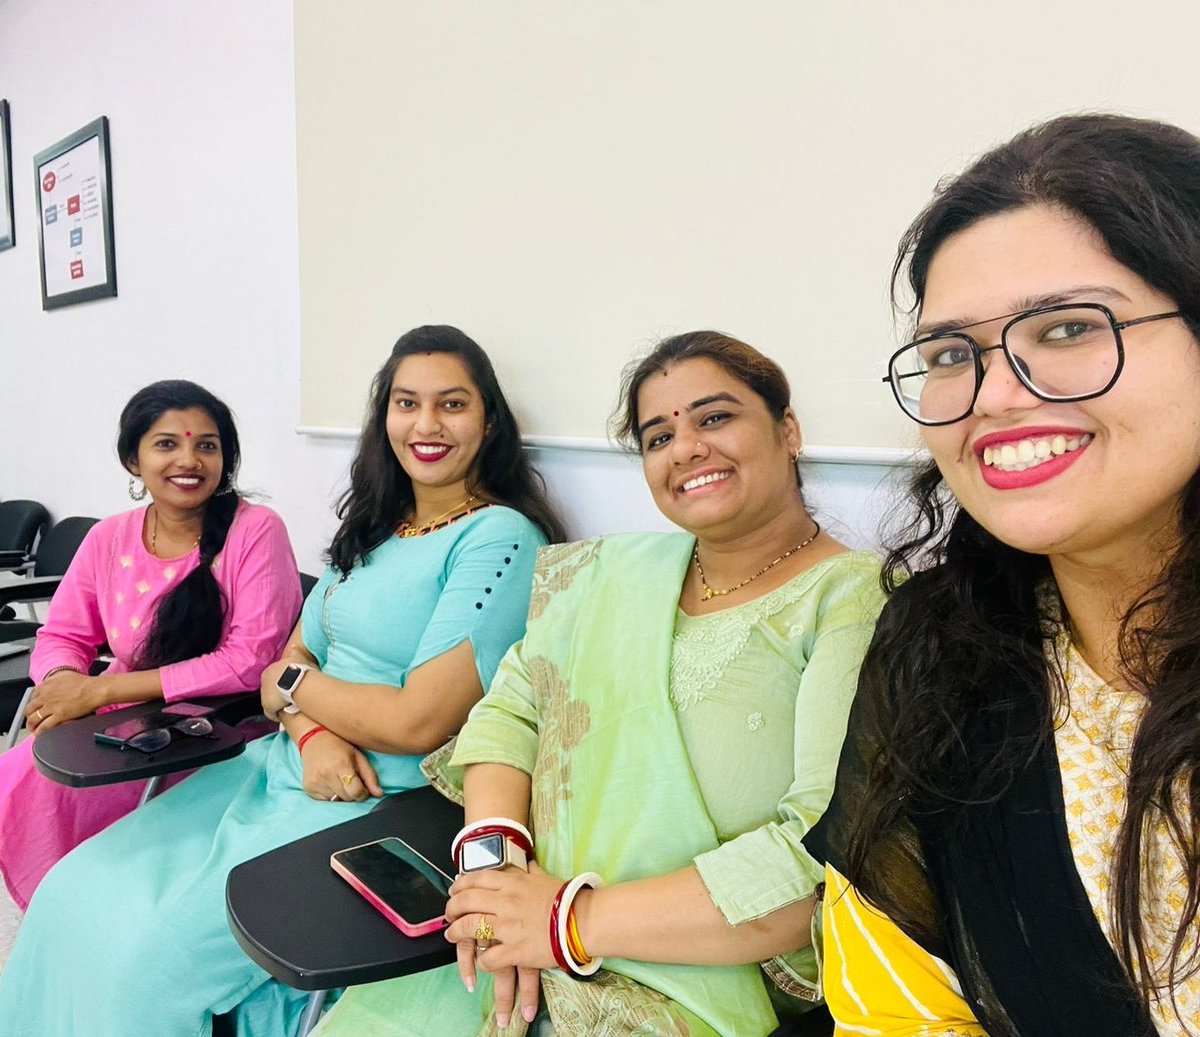 Happy Women's Day to all the incredible women out there! Hope you have a fabulous day
#WomensDay2023 #Beautifulladies #HRTeam @smartDataIncLtd